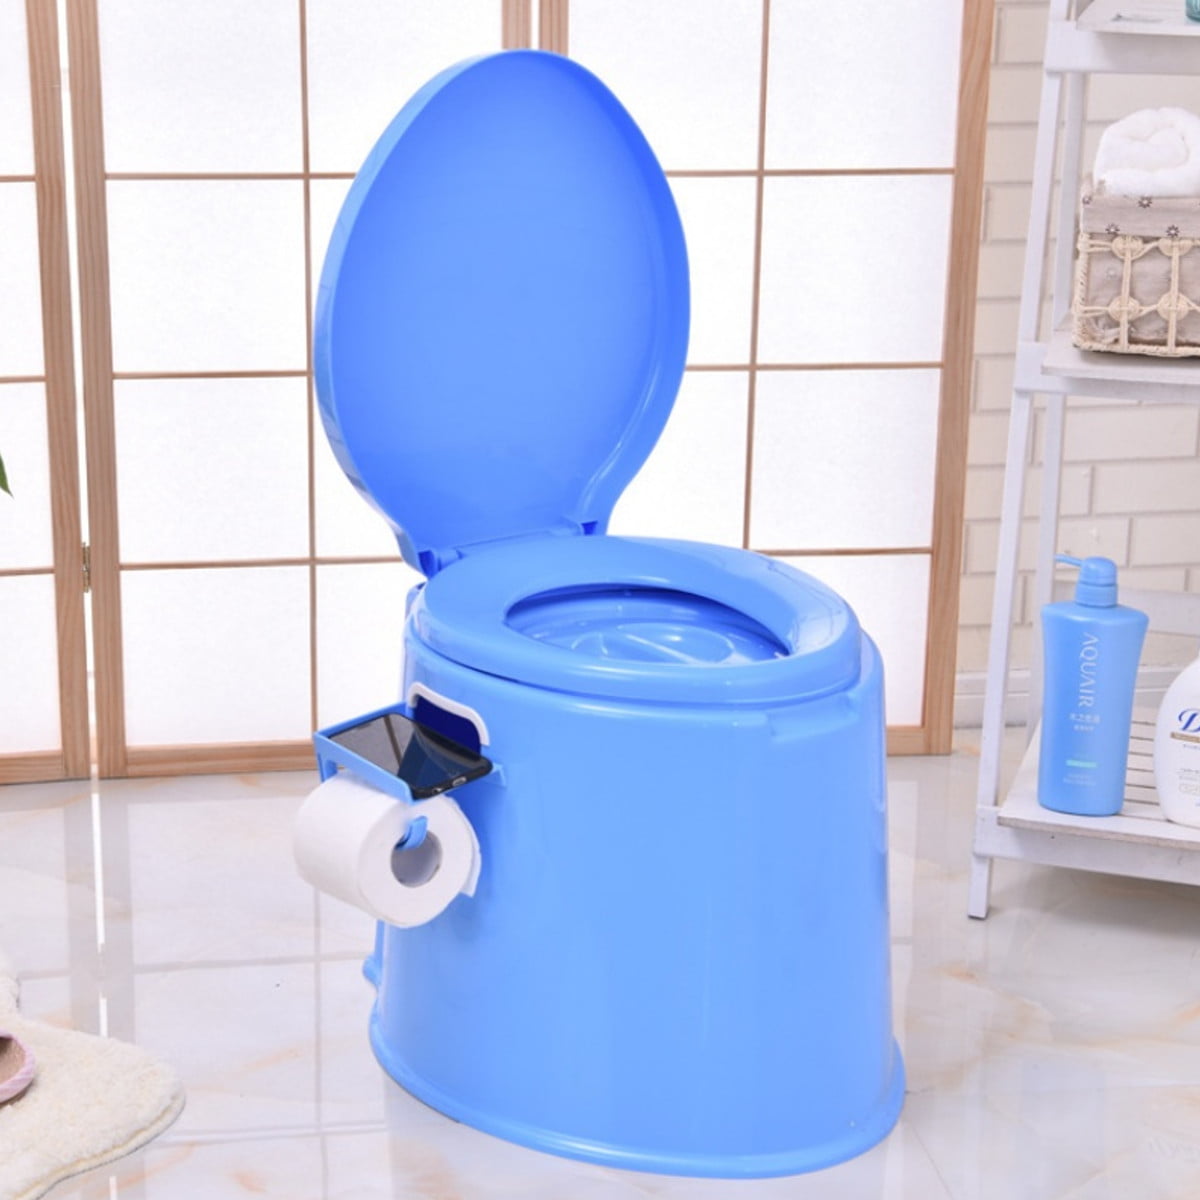 Portable Travel Toilet Compact Potty Bucket Seats With Waste Tank For